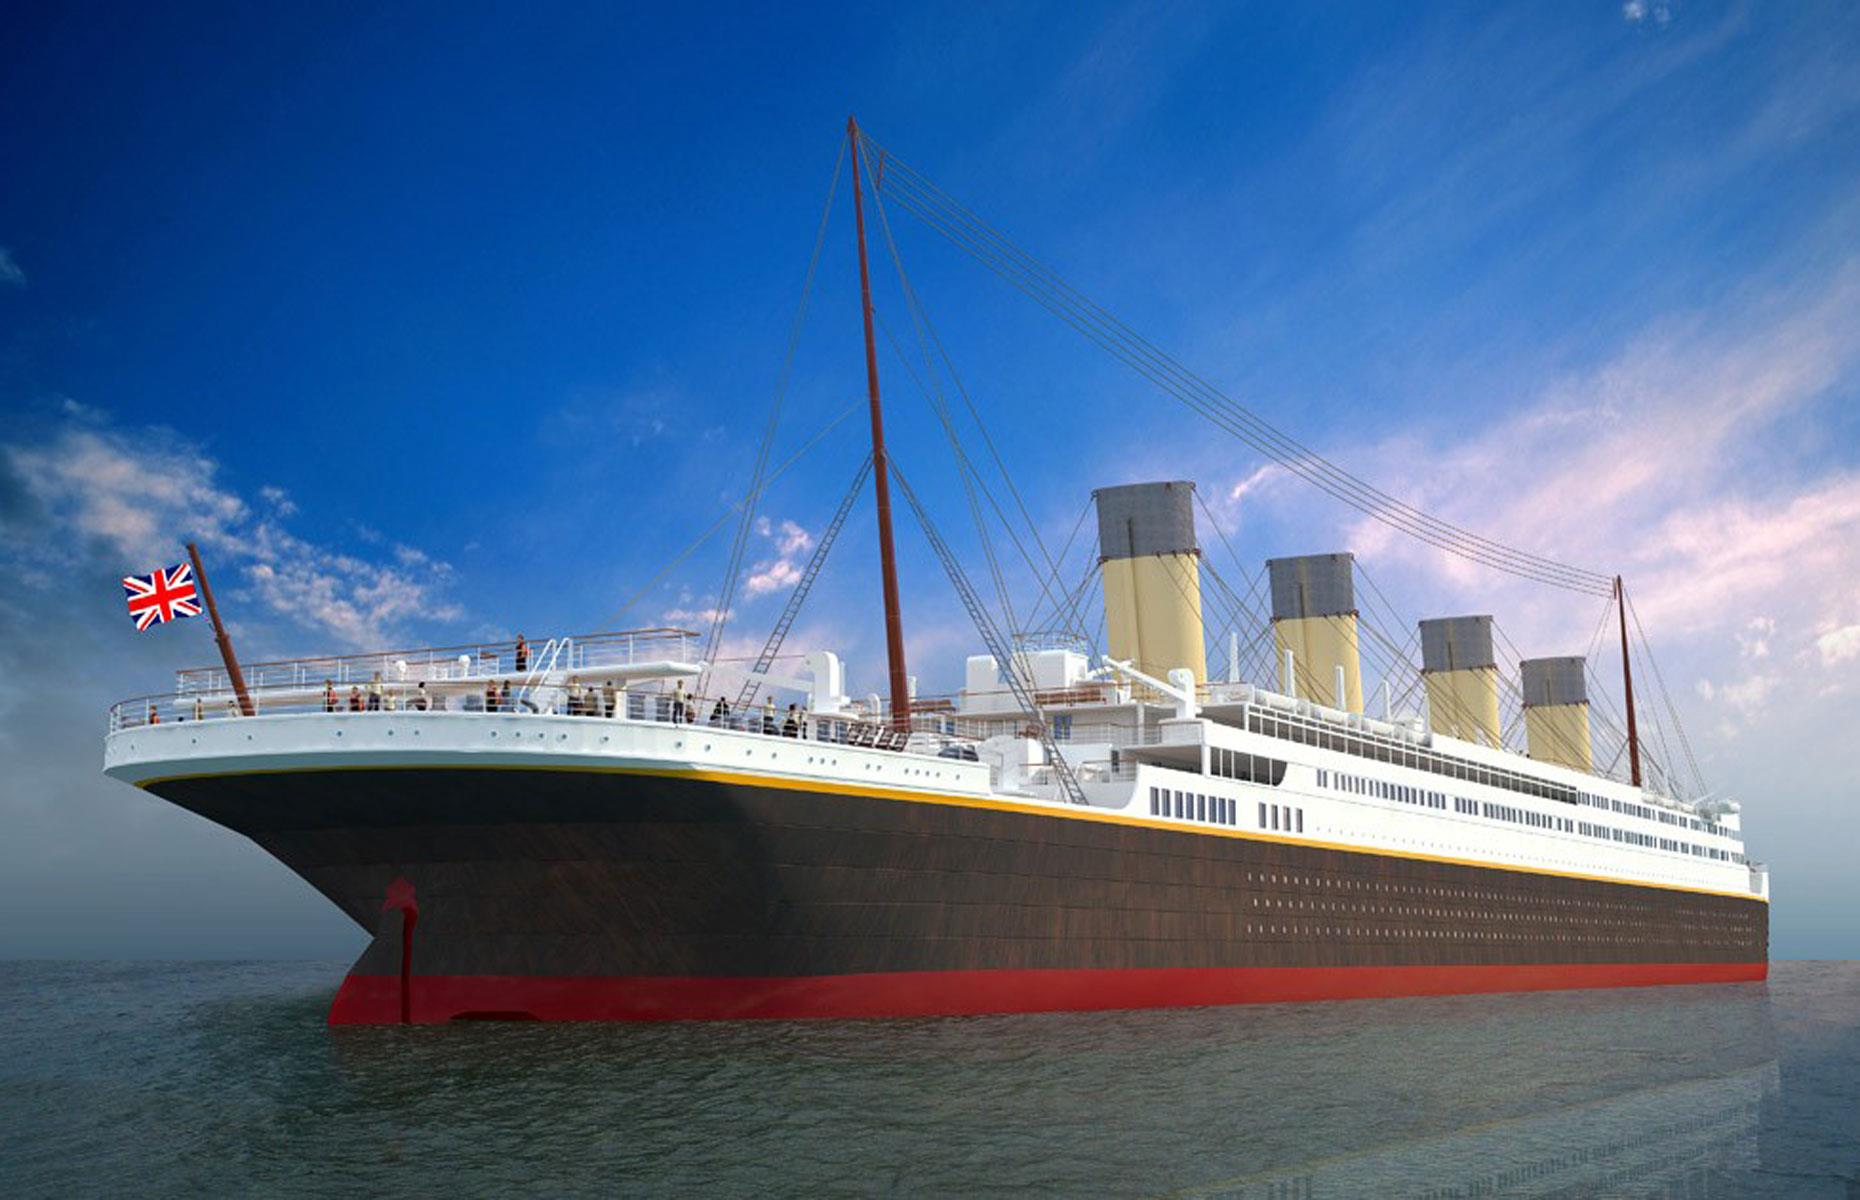 Will These Two New Titanic Ships Ever Be Built?